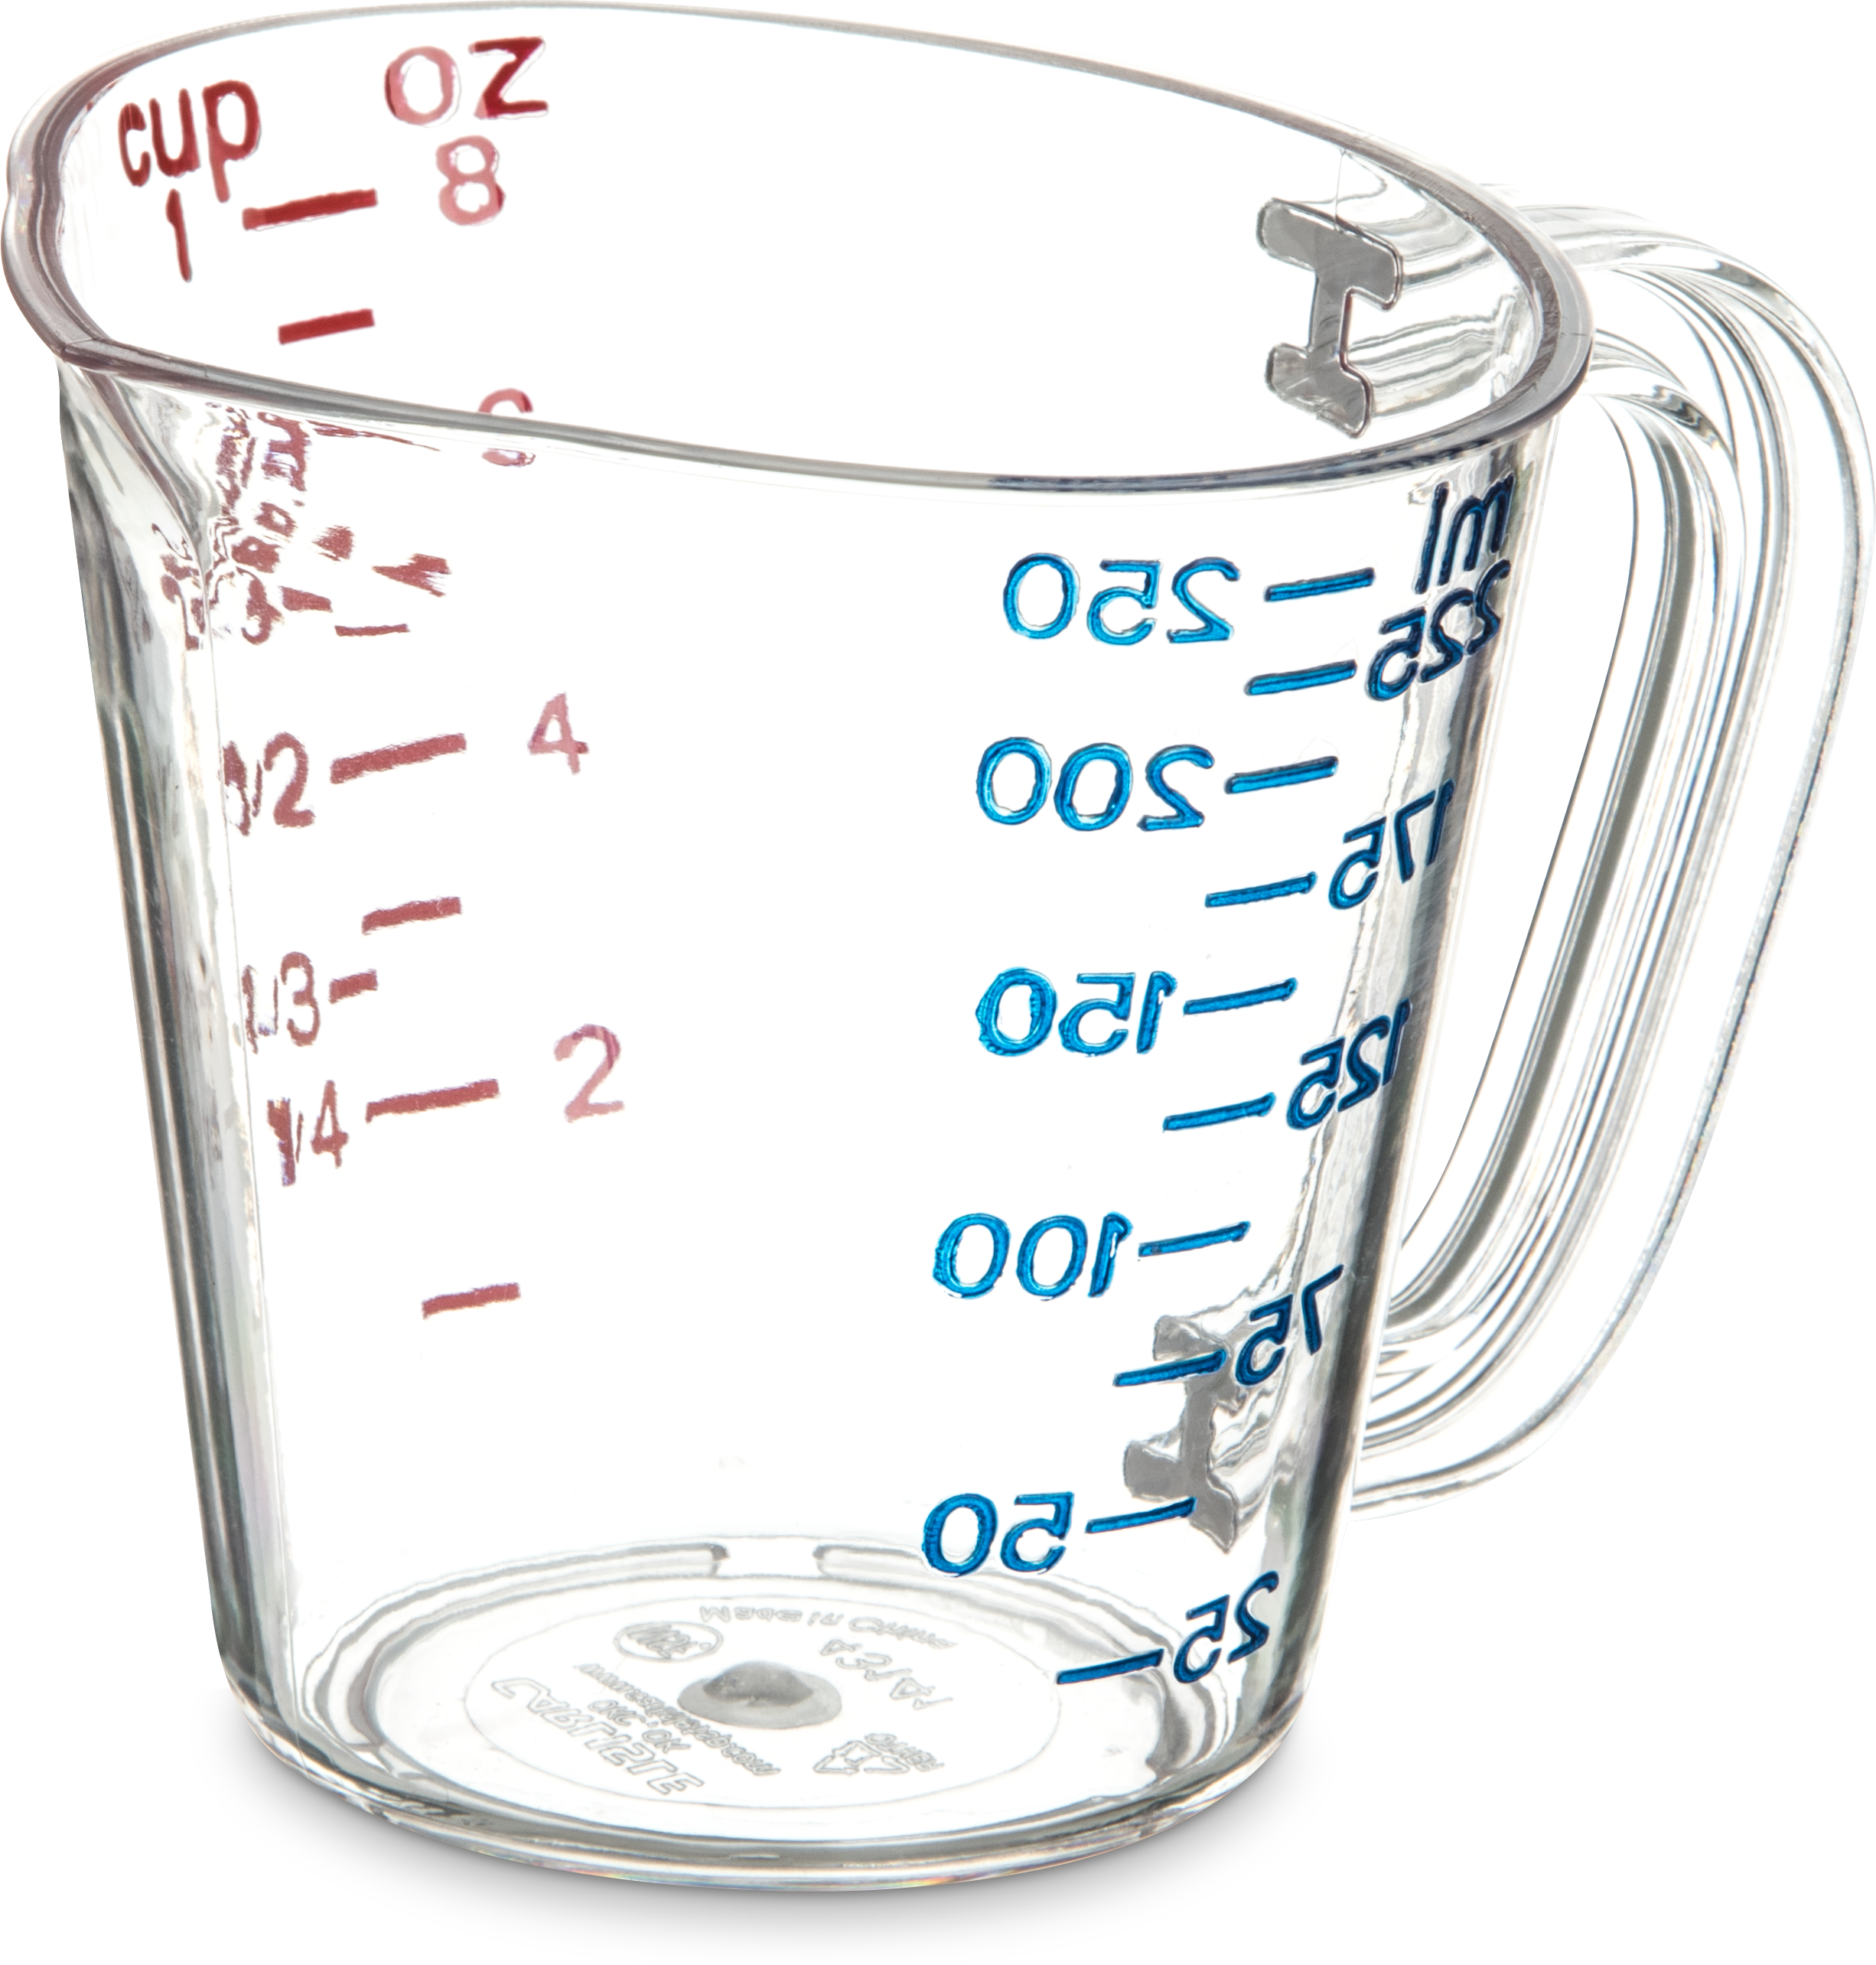 Measuring Cups for Wet Ingredients